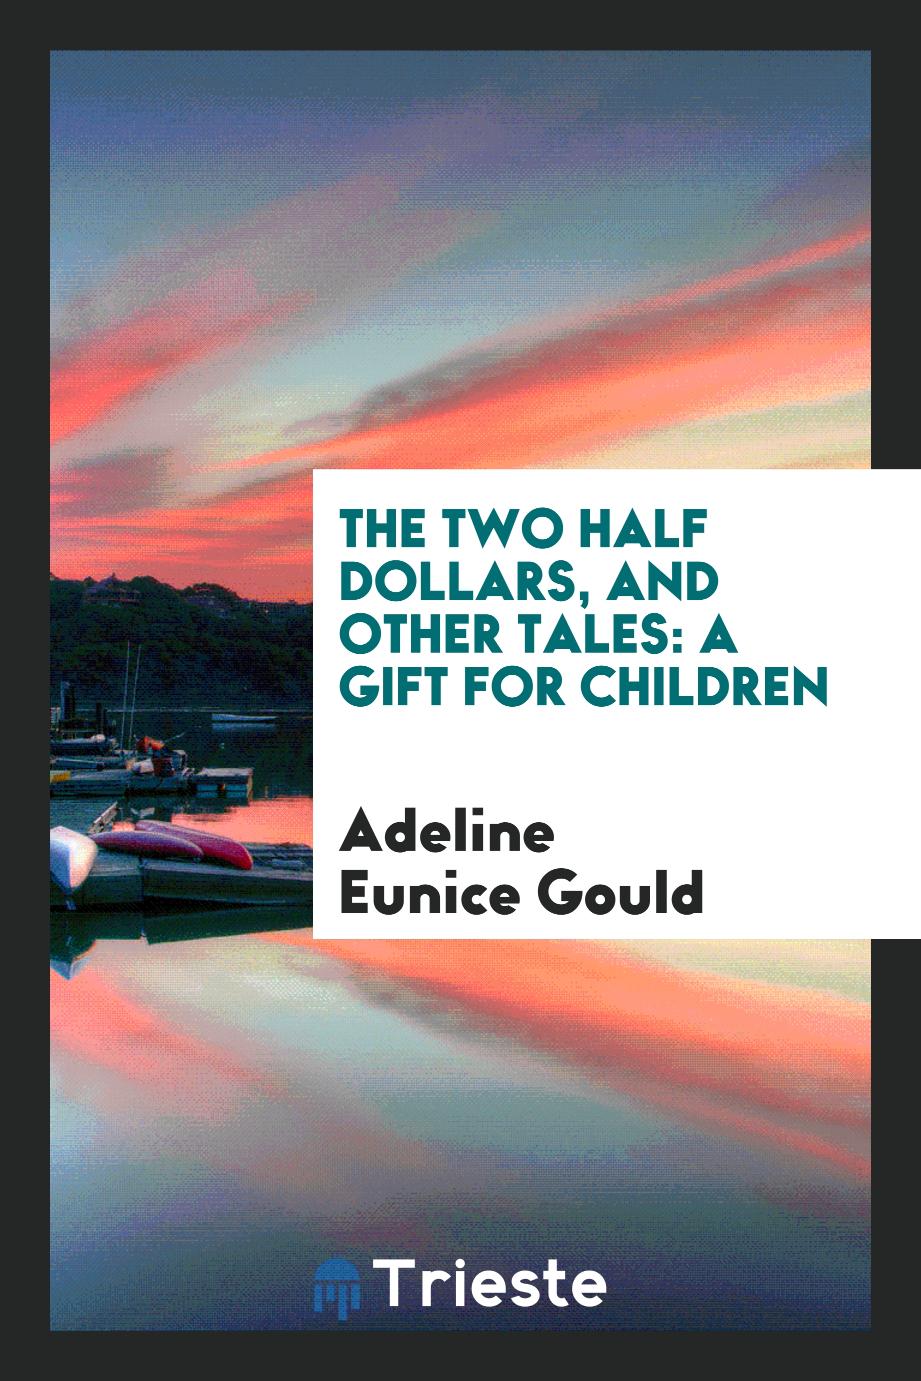 The Two Half Dollars, and Other Tales: A Gift for Children